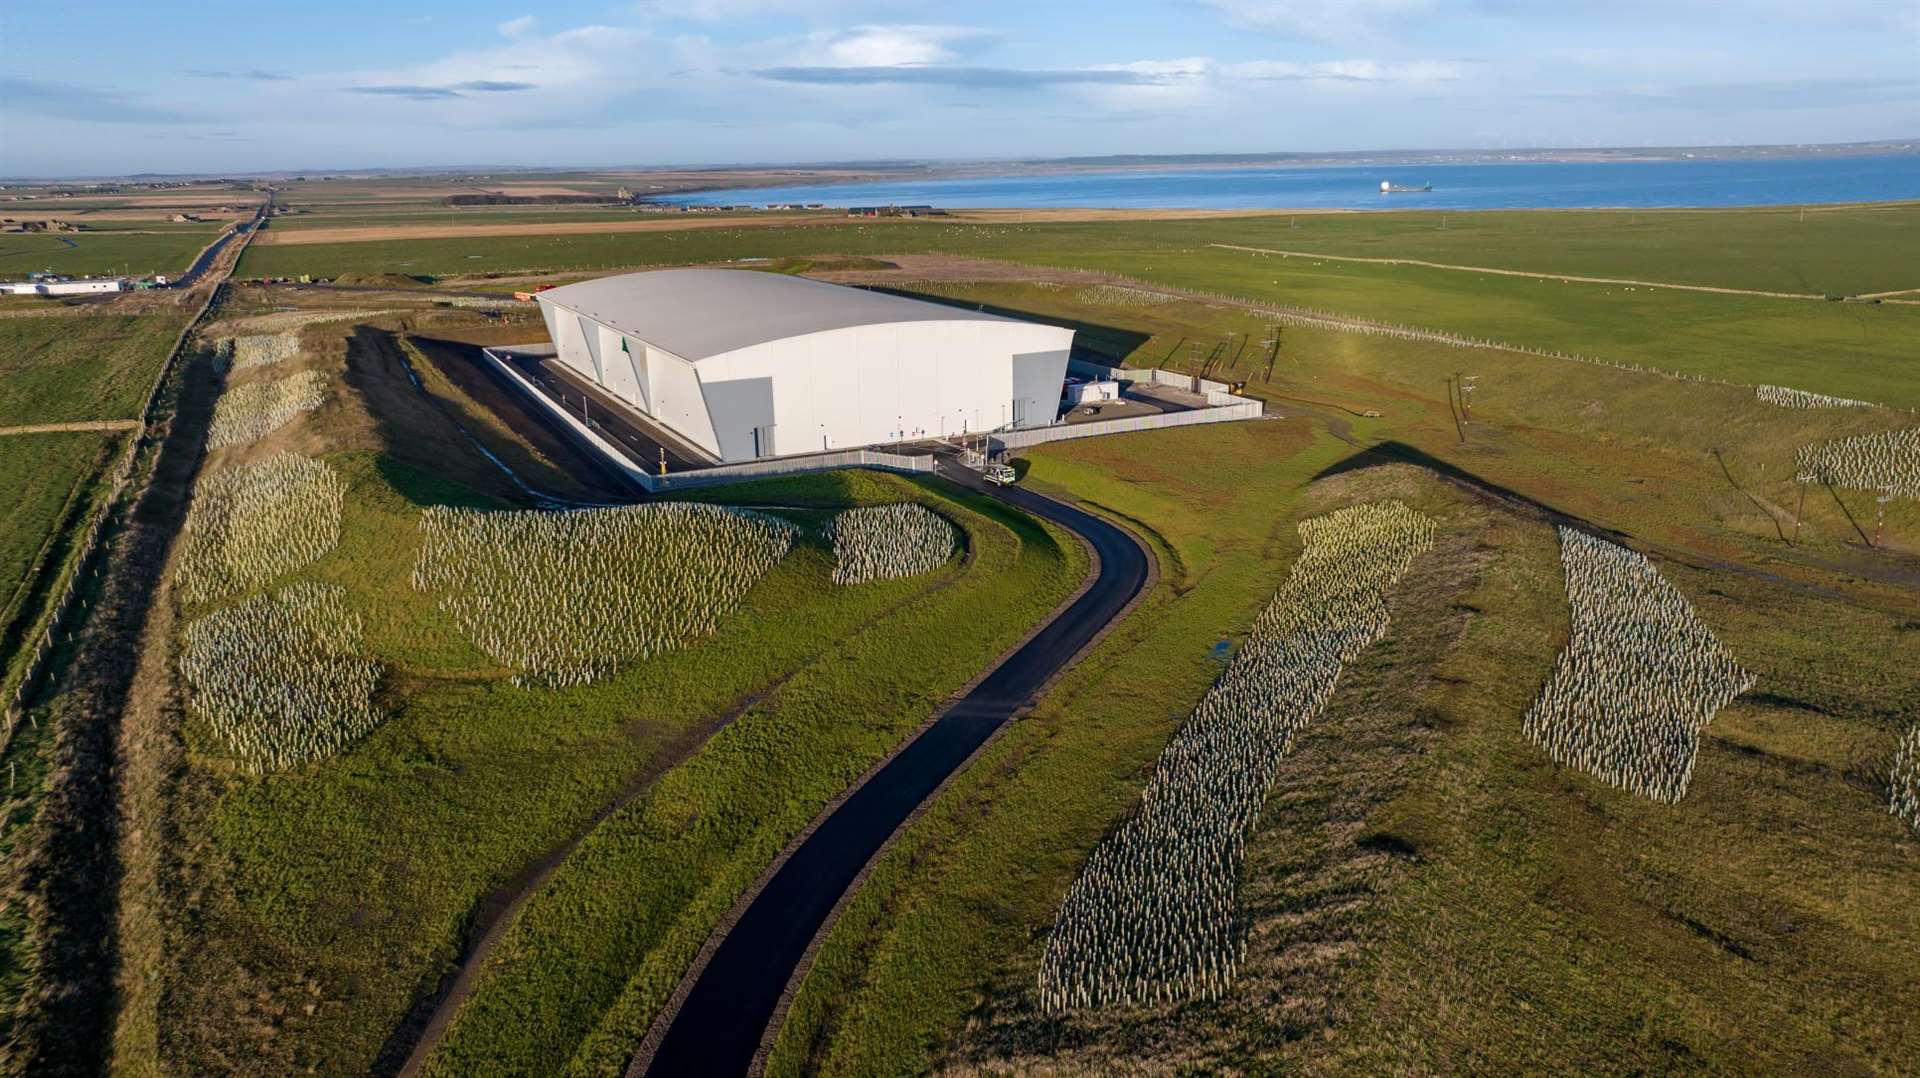 The switching station at Noss Head will help connect Shetland to the national grid for the first time